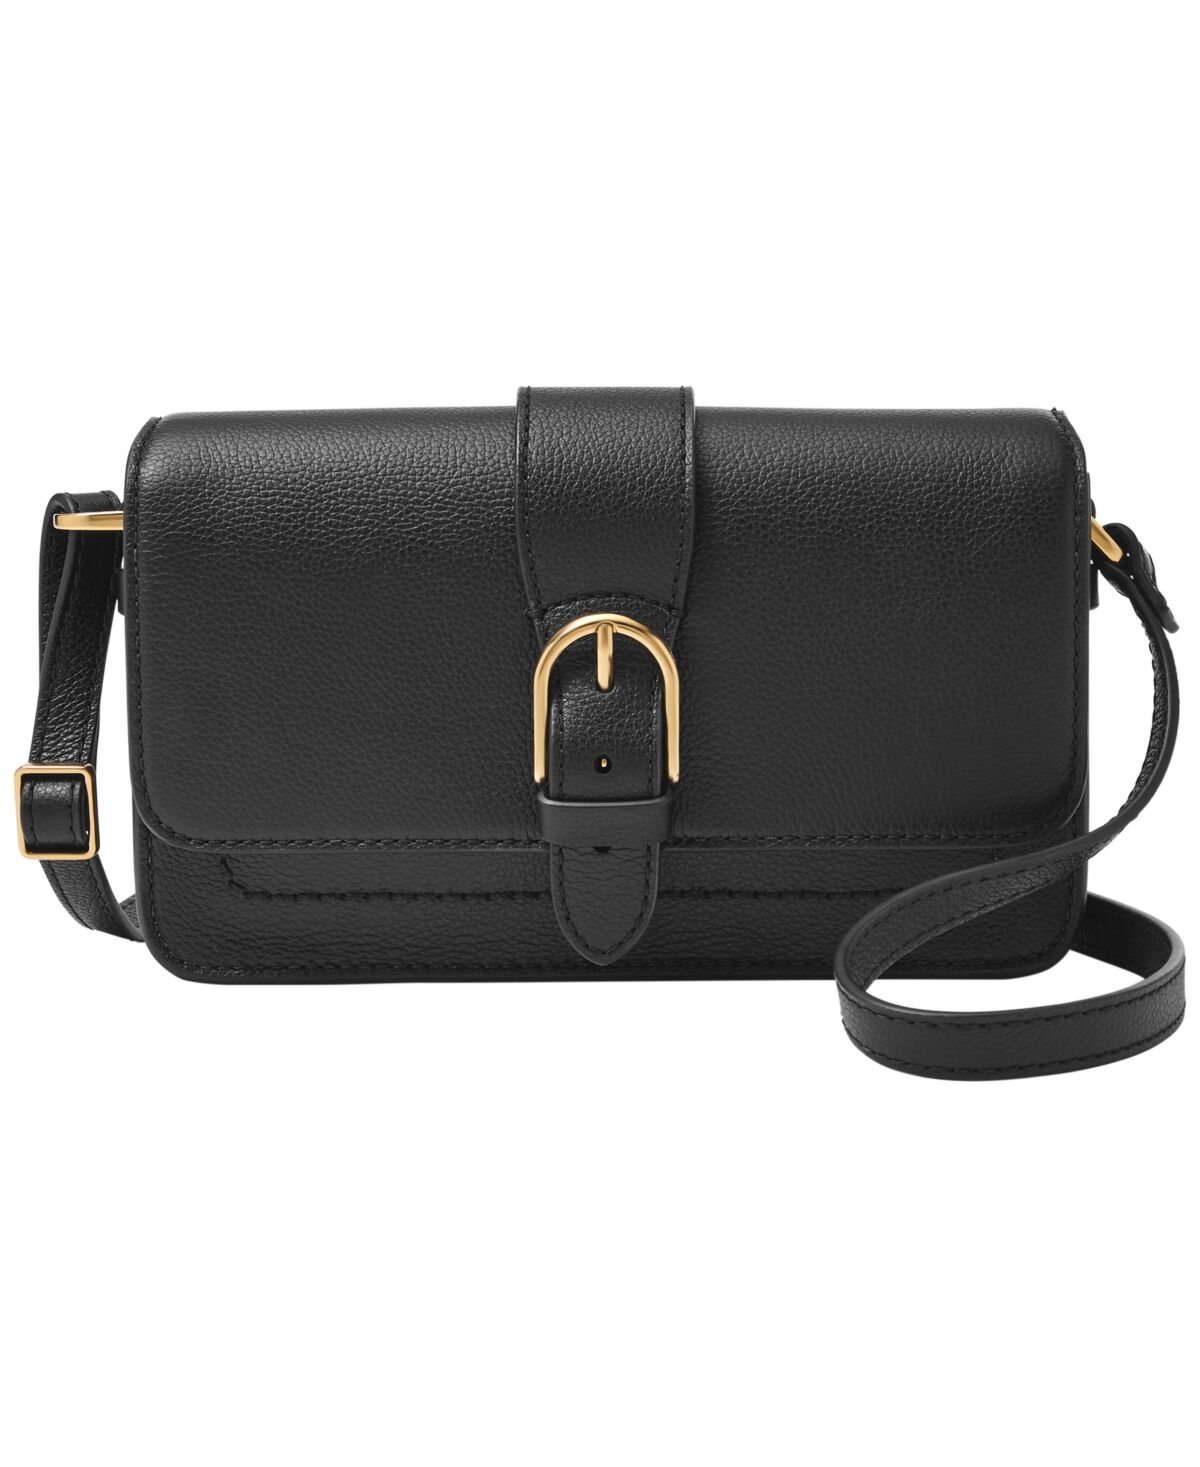 Fossil Small Zoey Leather Crossbody Bag - Black